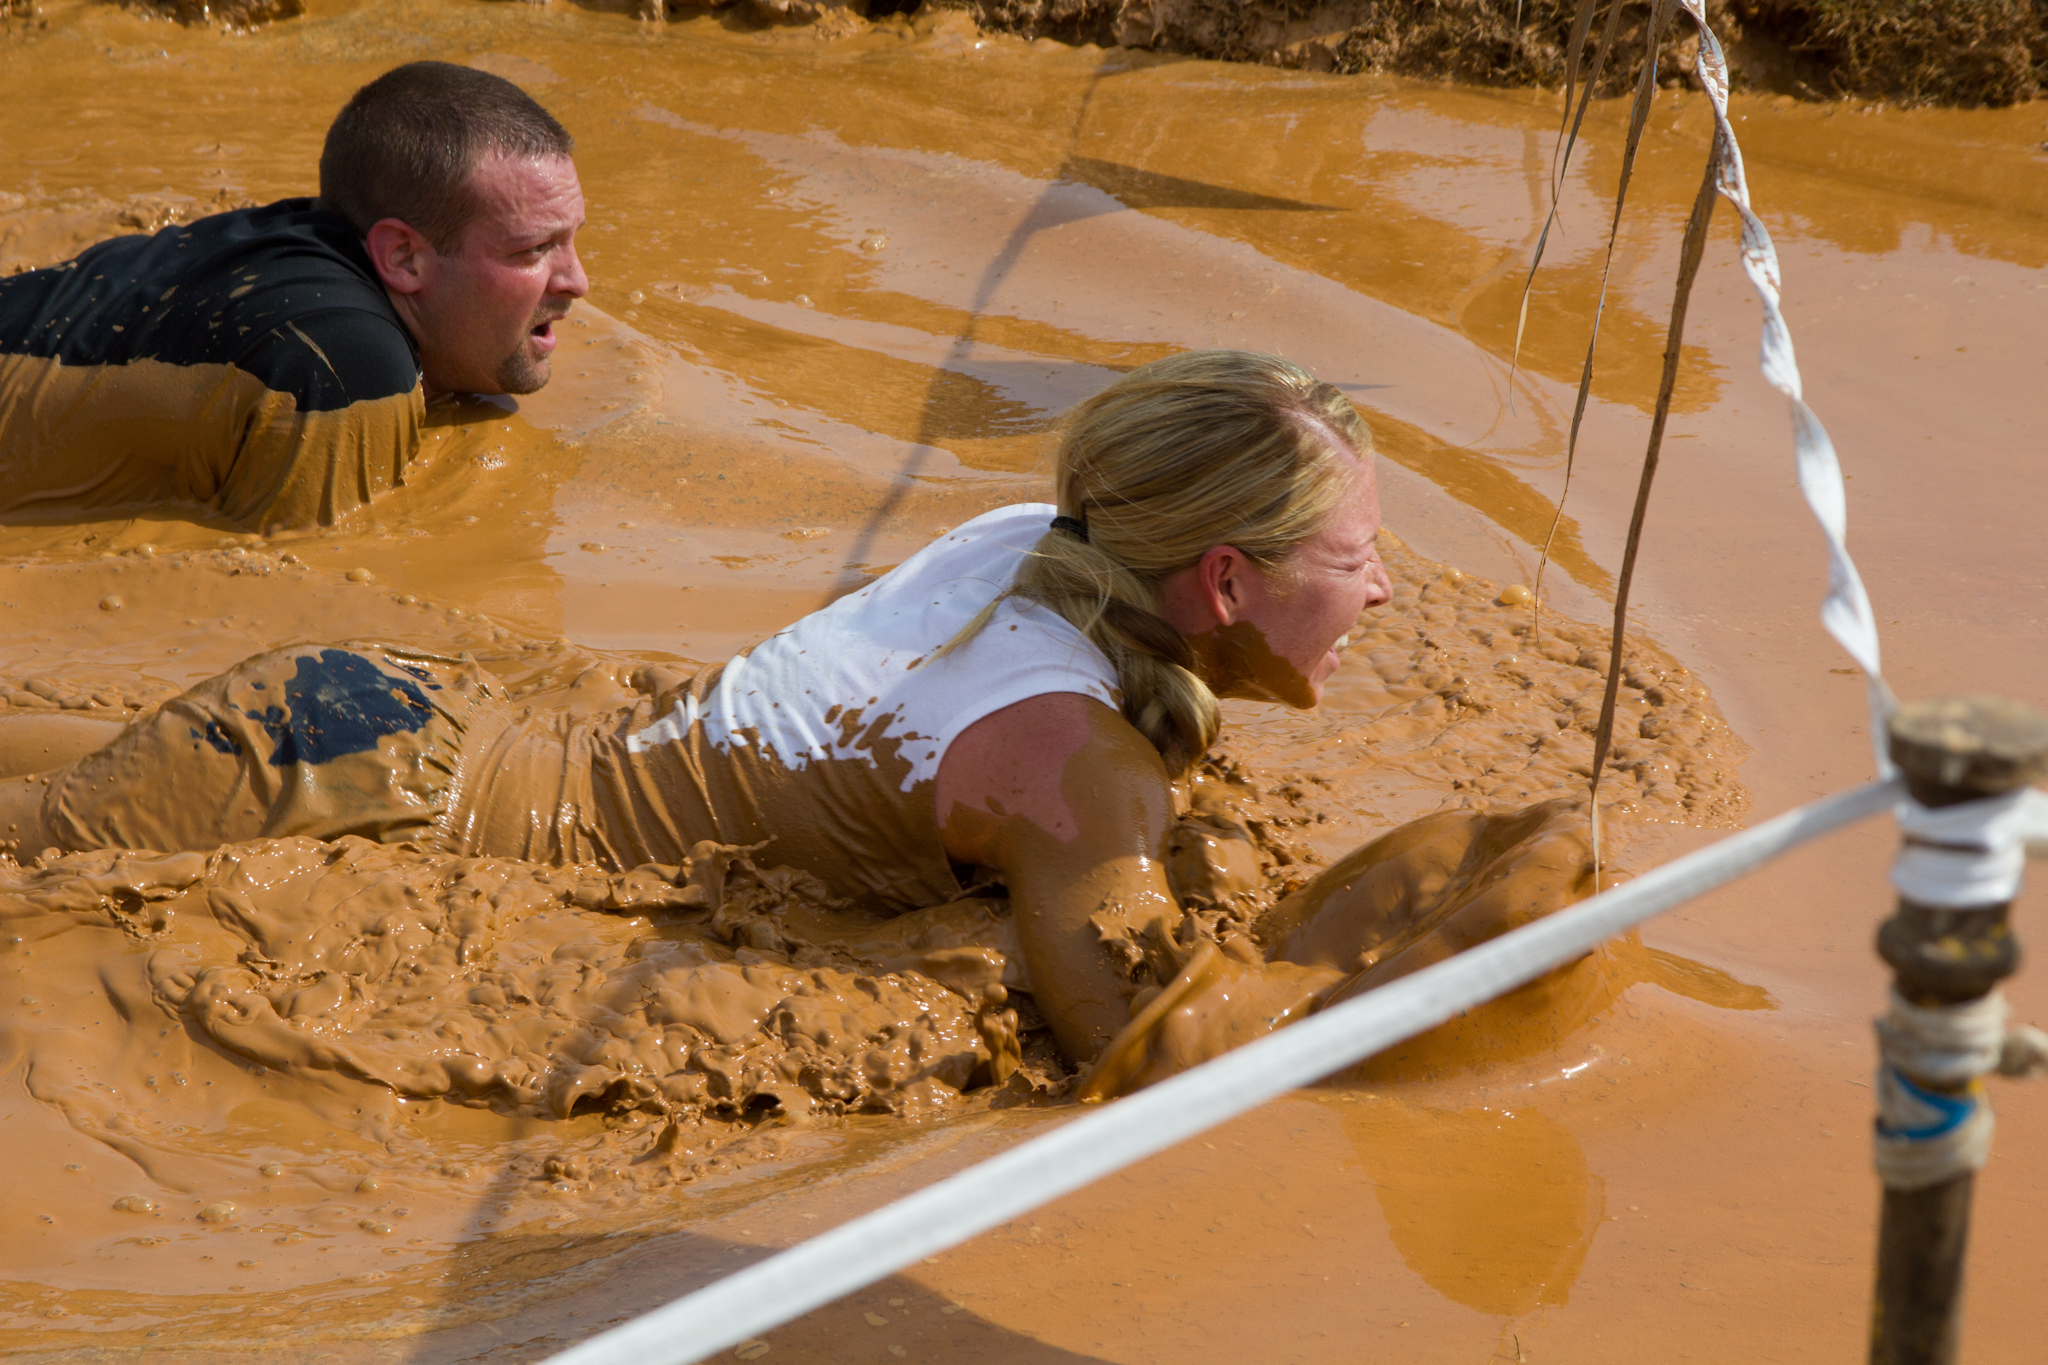 two people playing in a muddy area of water